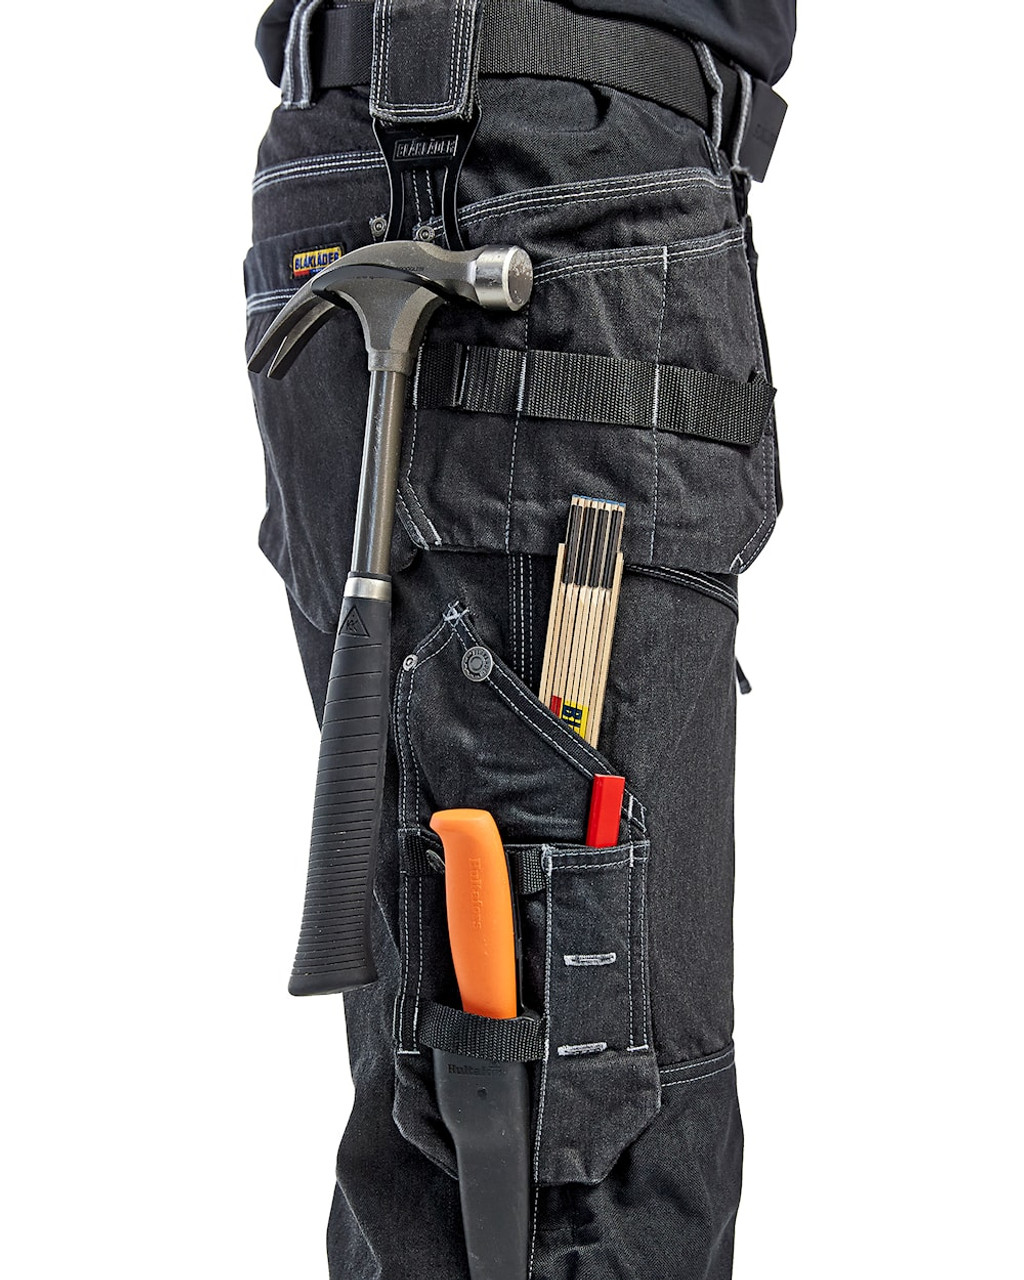 Buy online in Australia BLAKLADER 2-Way Stretch Black Trousers for Electricians that are looking for comfortable work trousers.